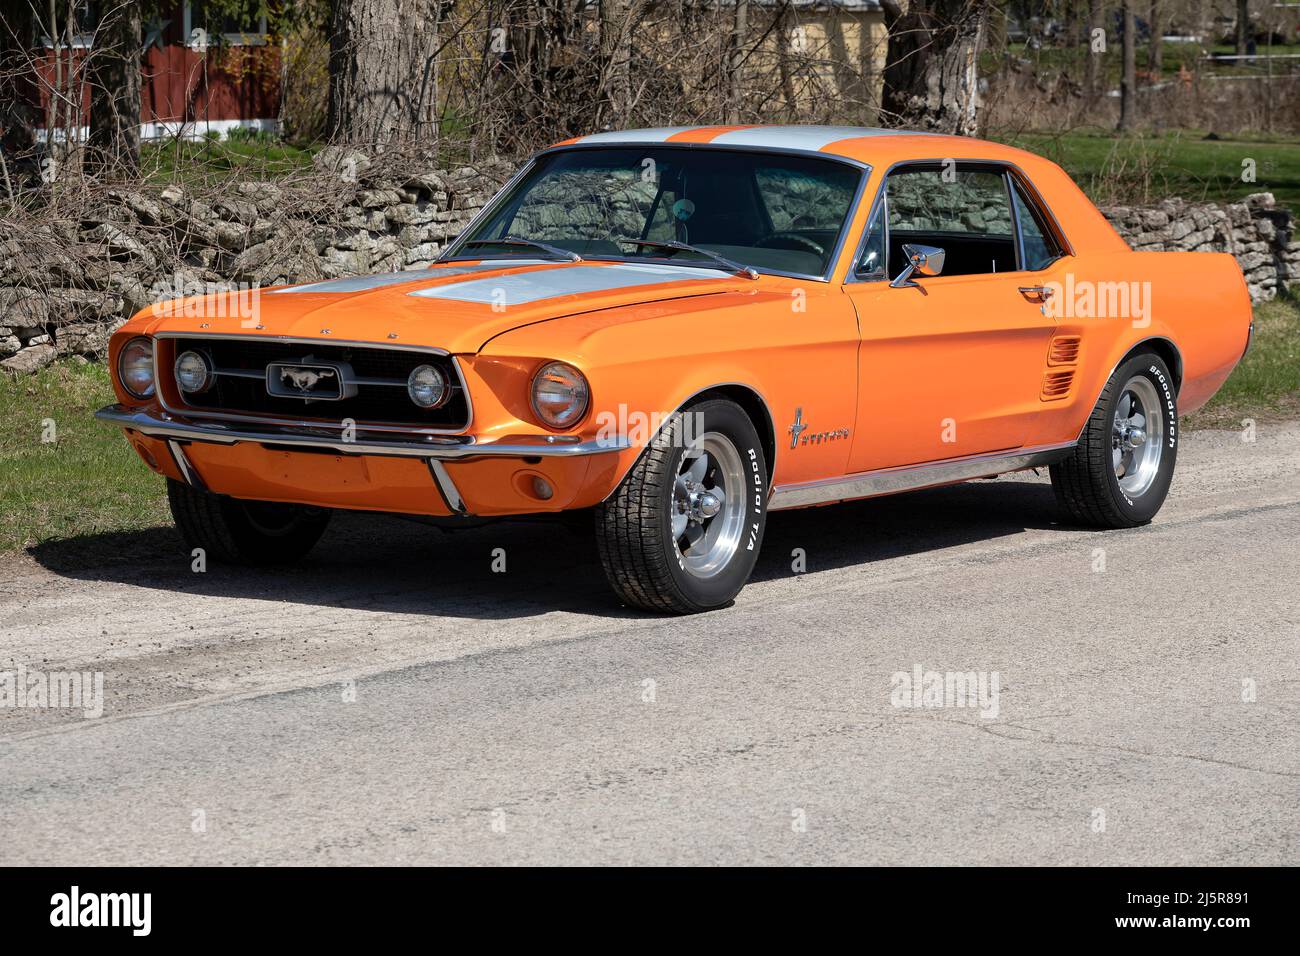 1967 Ford Mustang on pavement Stock Photo - Alamy